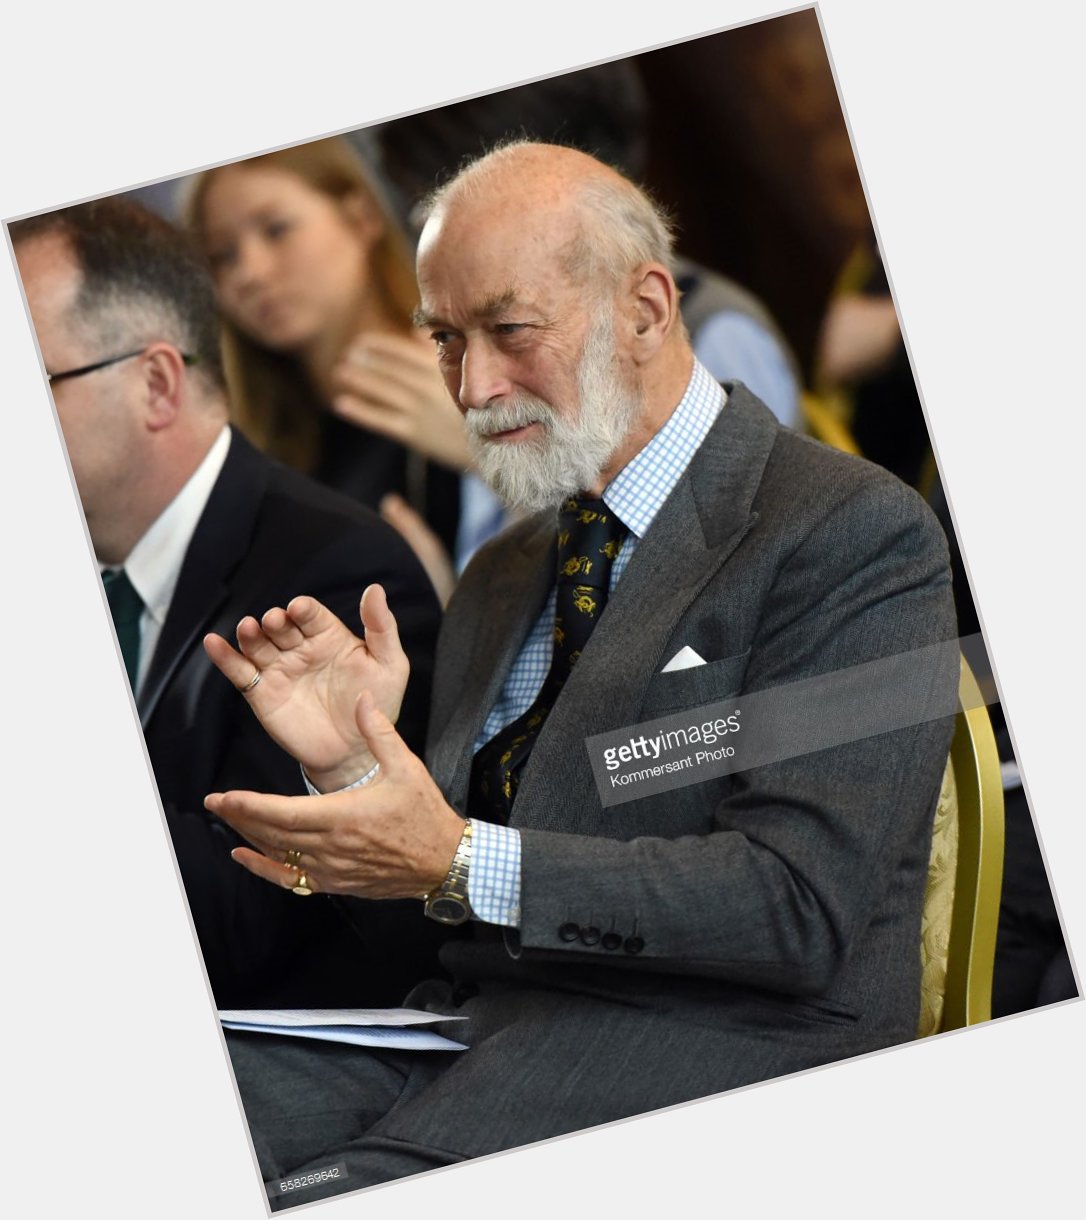 Happy Birthday Prince Michael of Kent! He\s the grandson of George V! He turnt 75 today! 